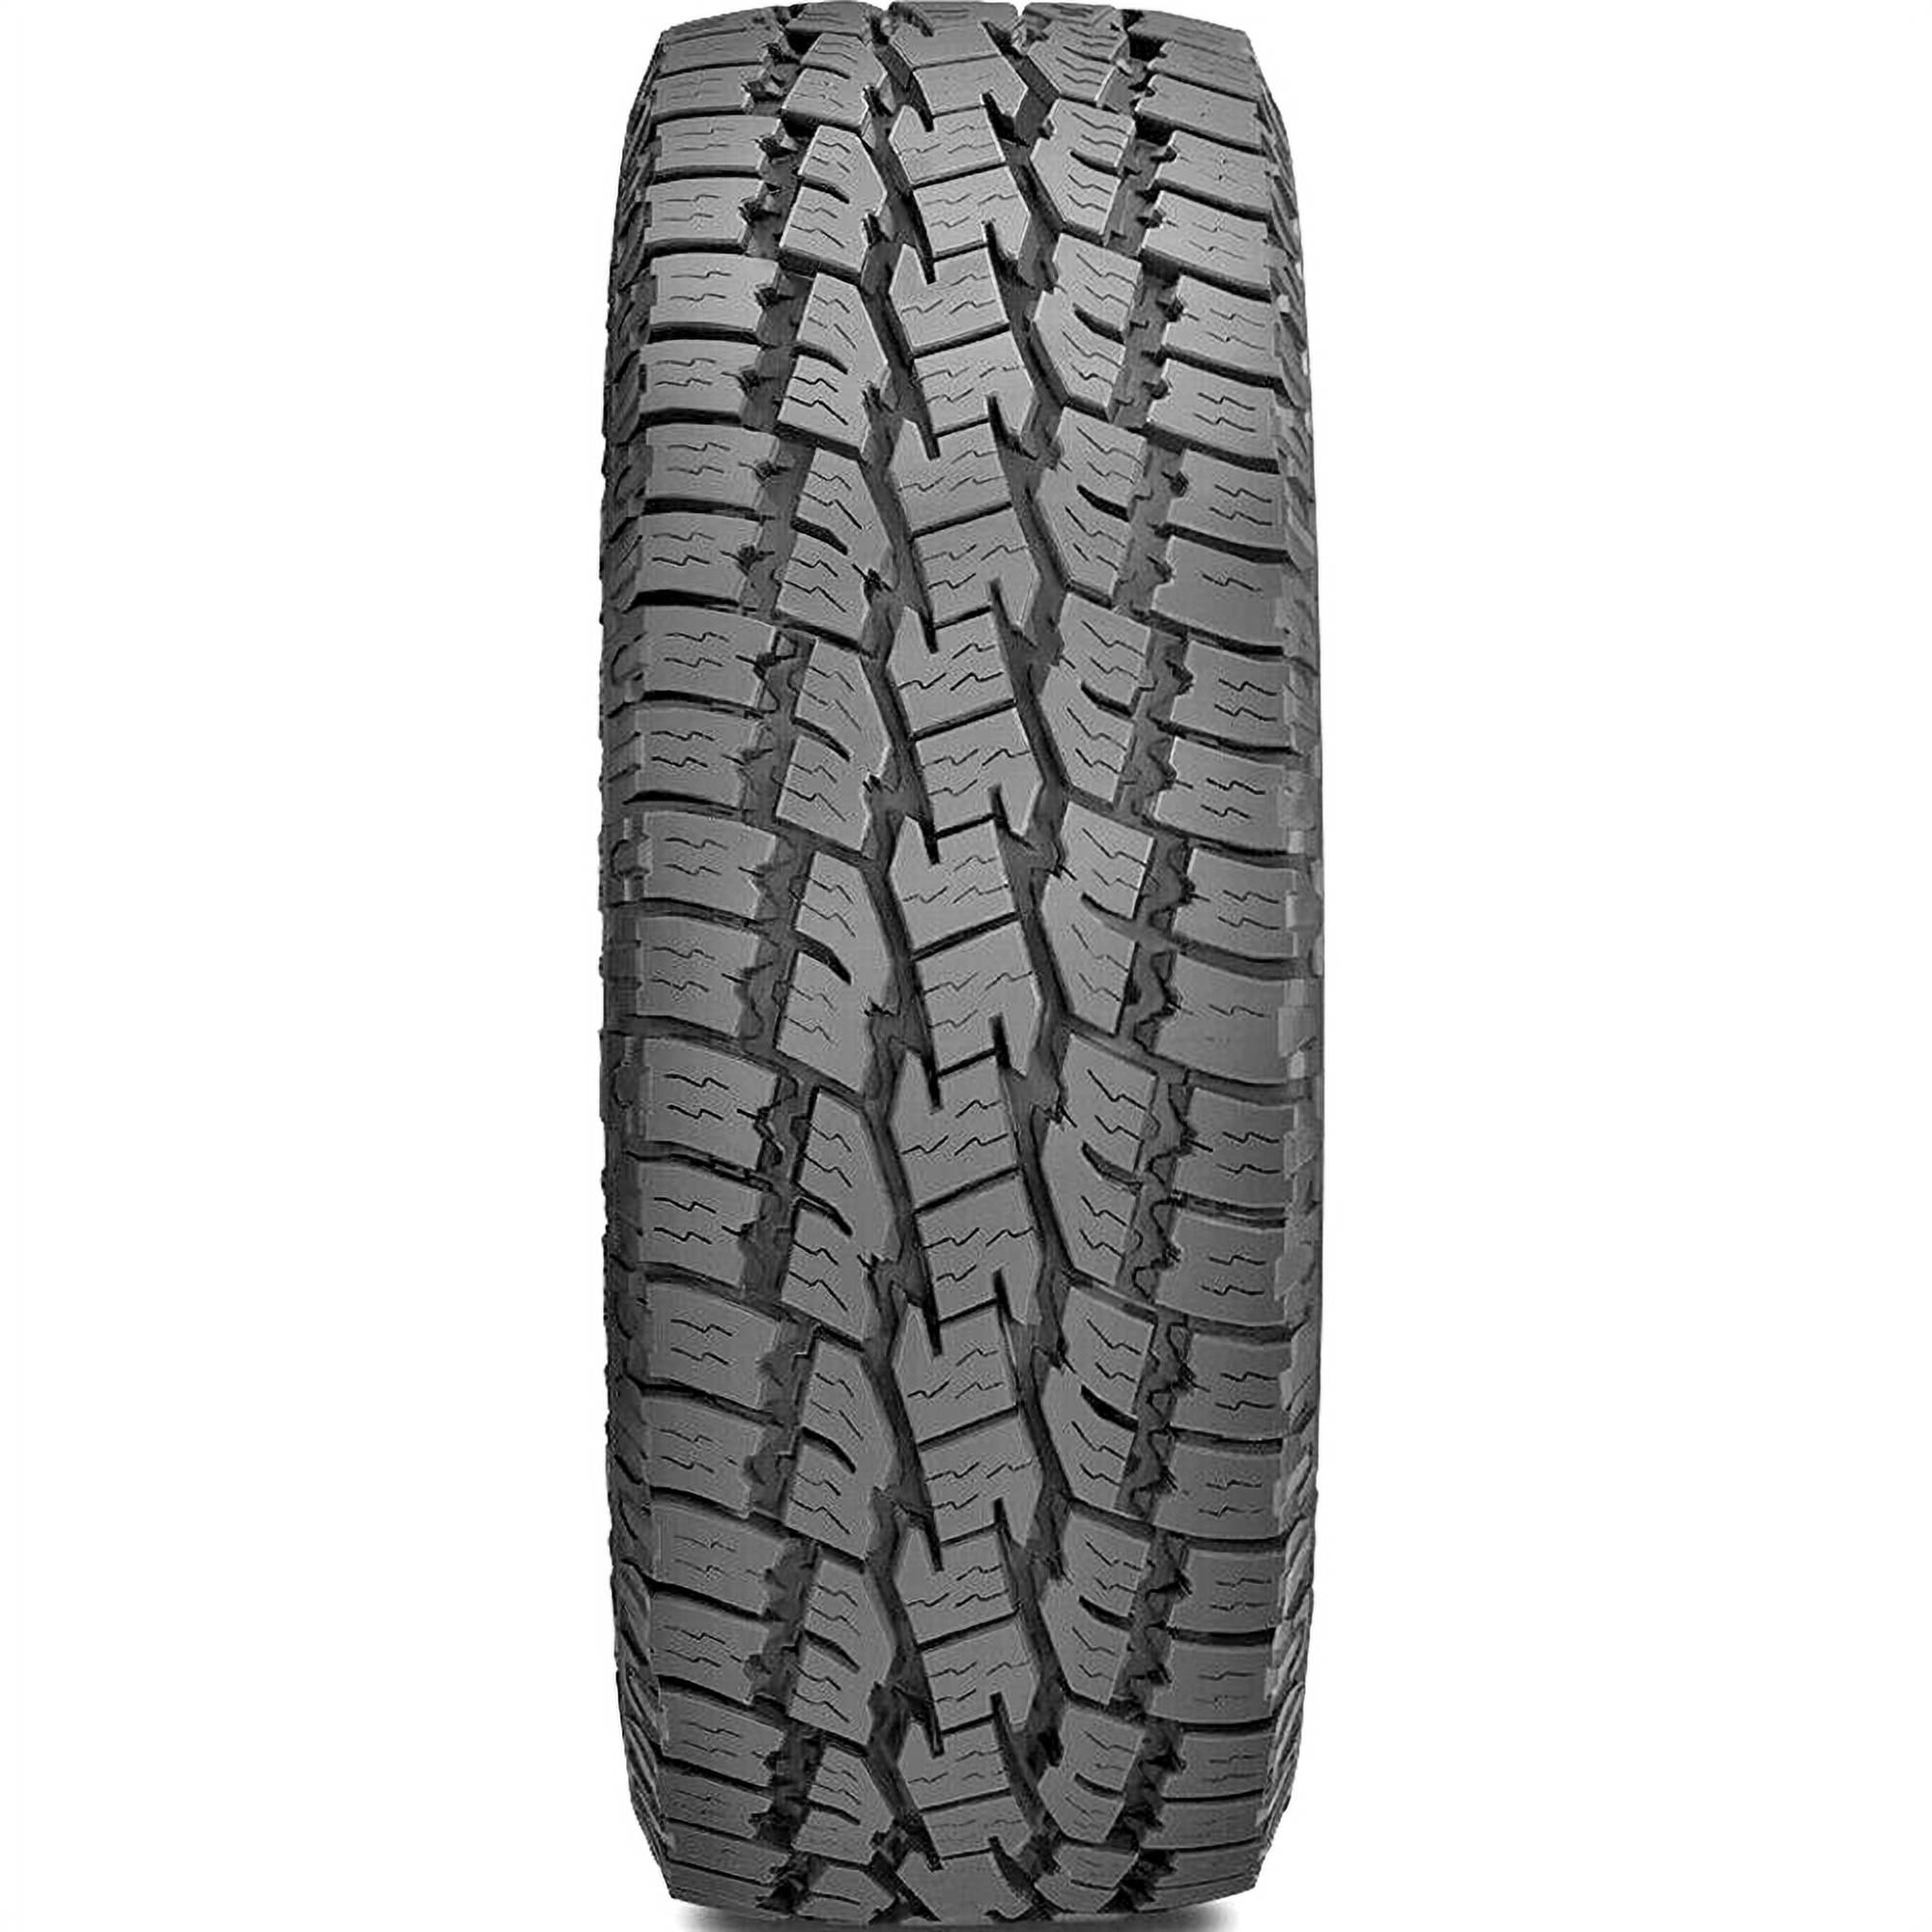 Toyo Open Country A/T II Radial Tire 265/65R17 110T 